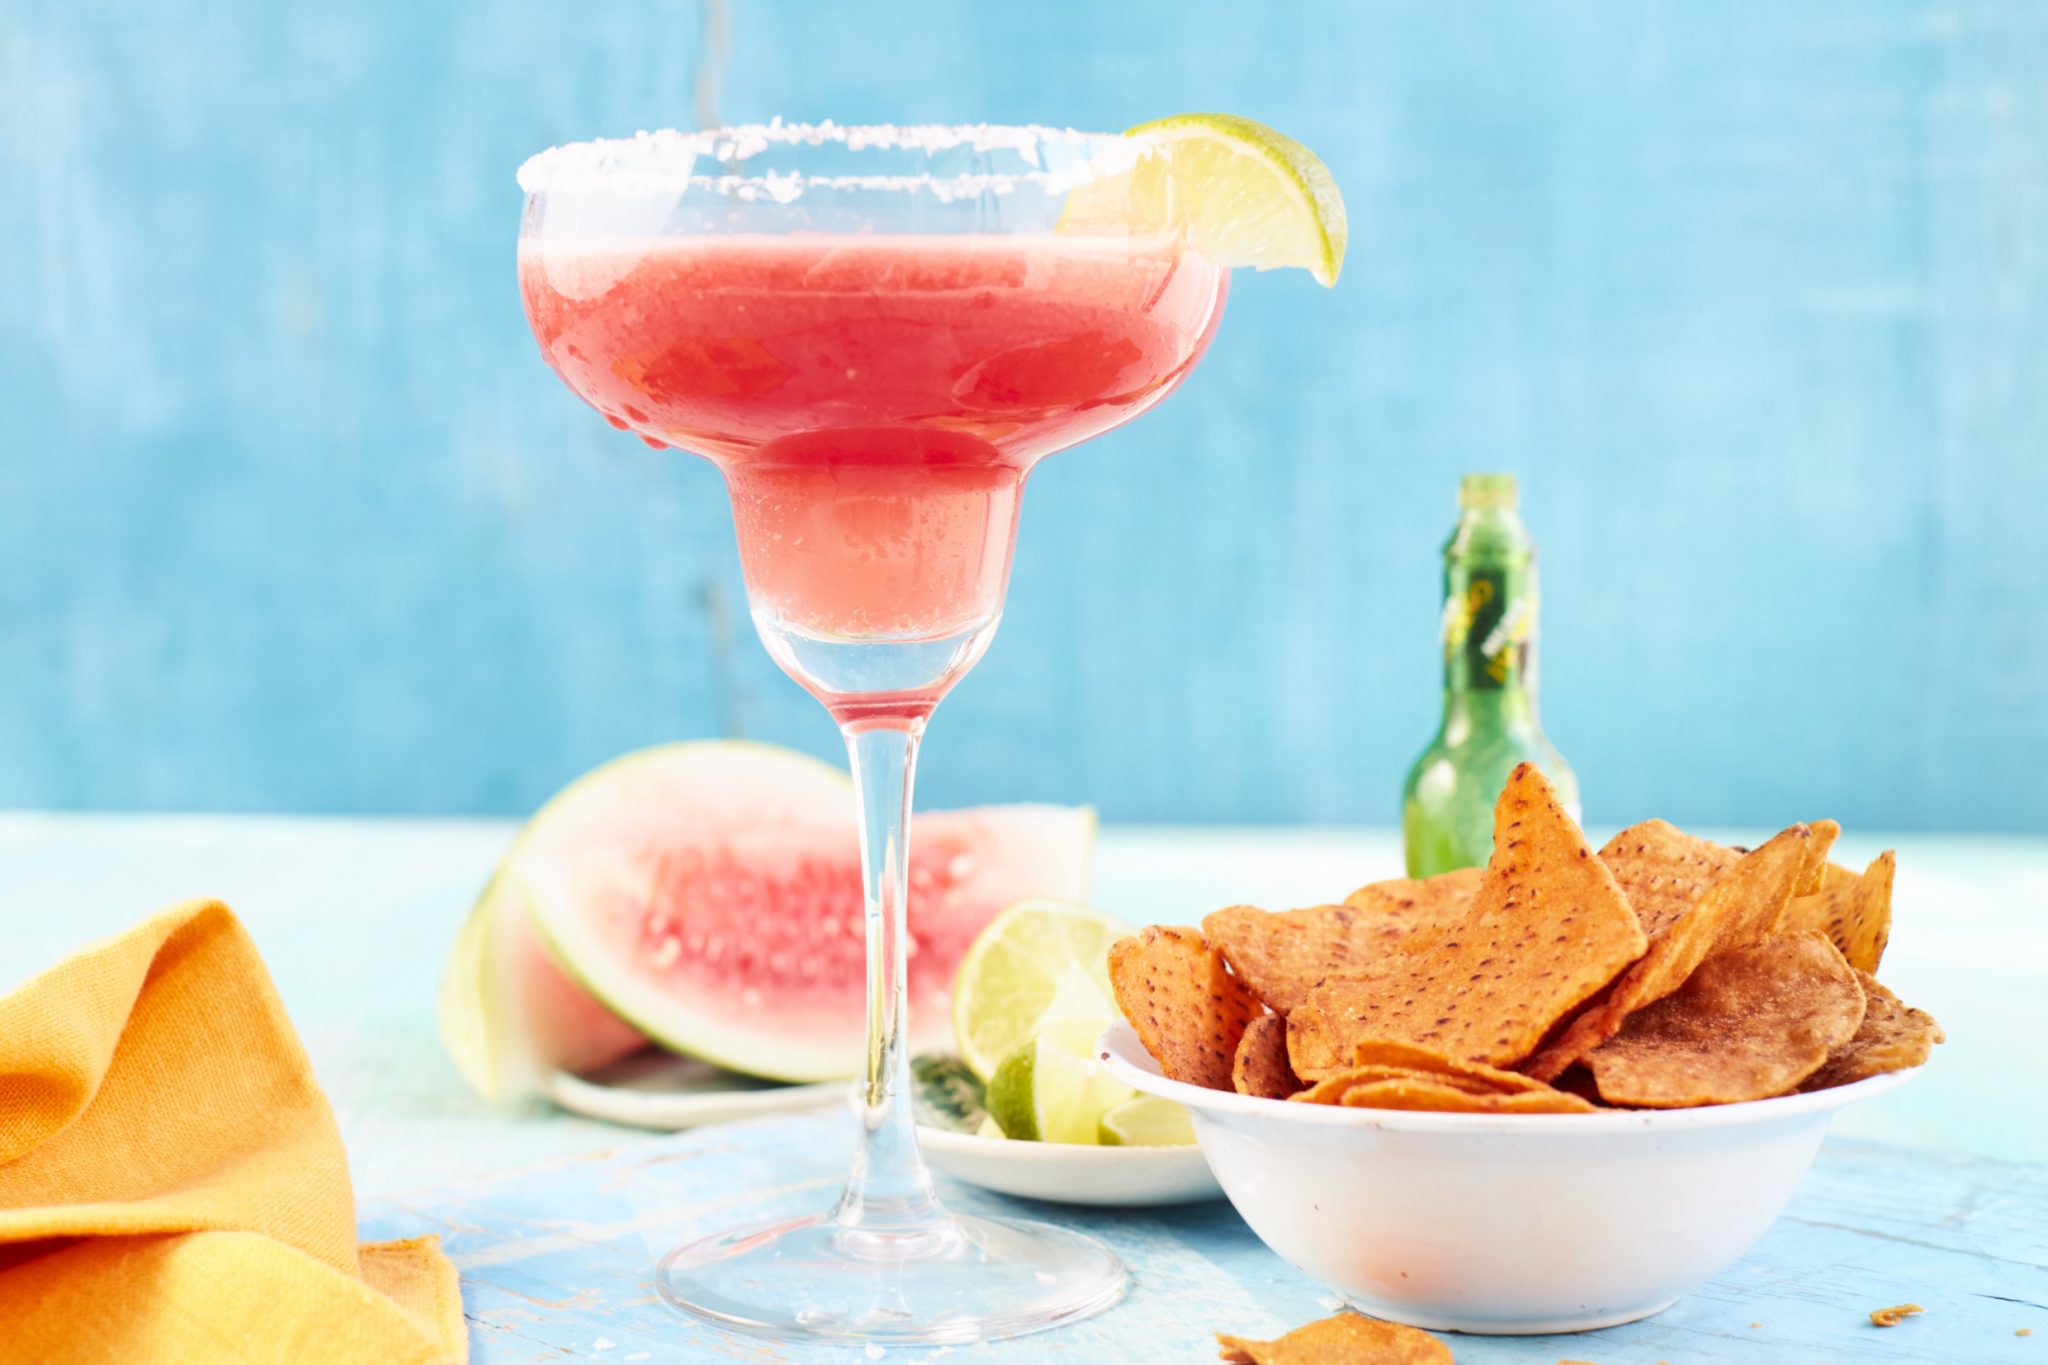 WATERMELON MARGARITA WITH CHIPOTLE & LIME TORTILLA CHIPS